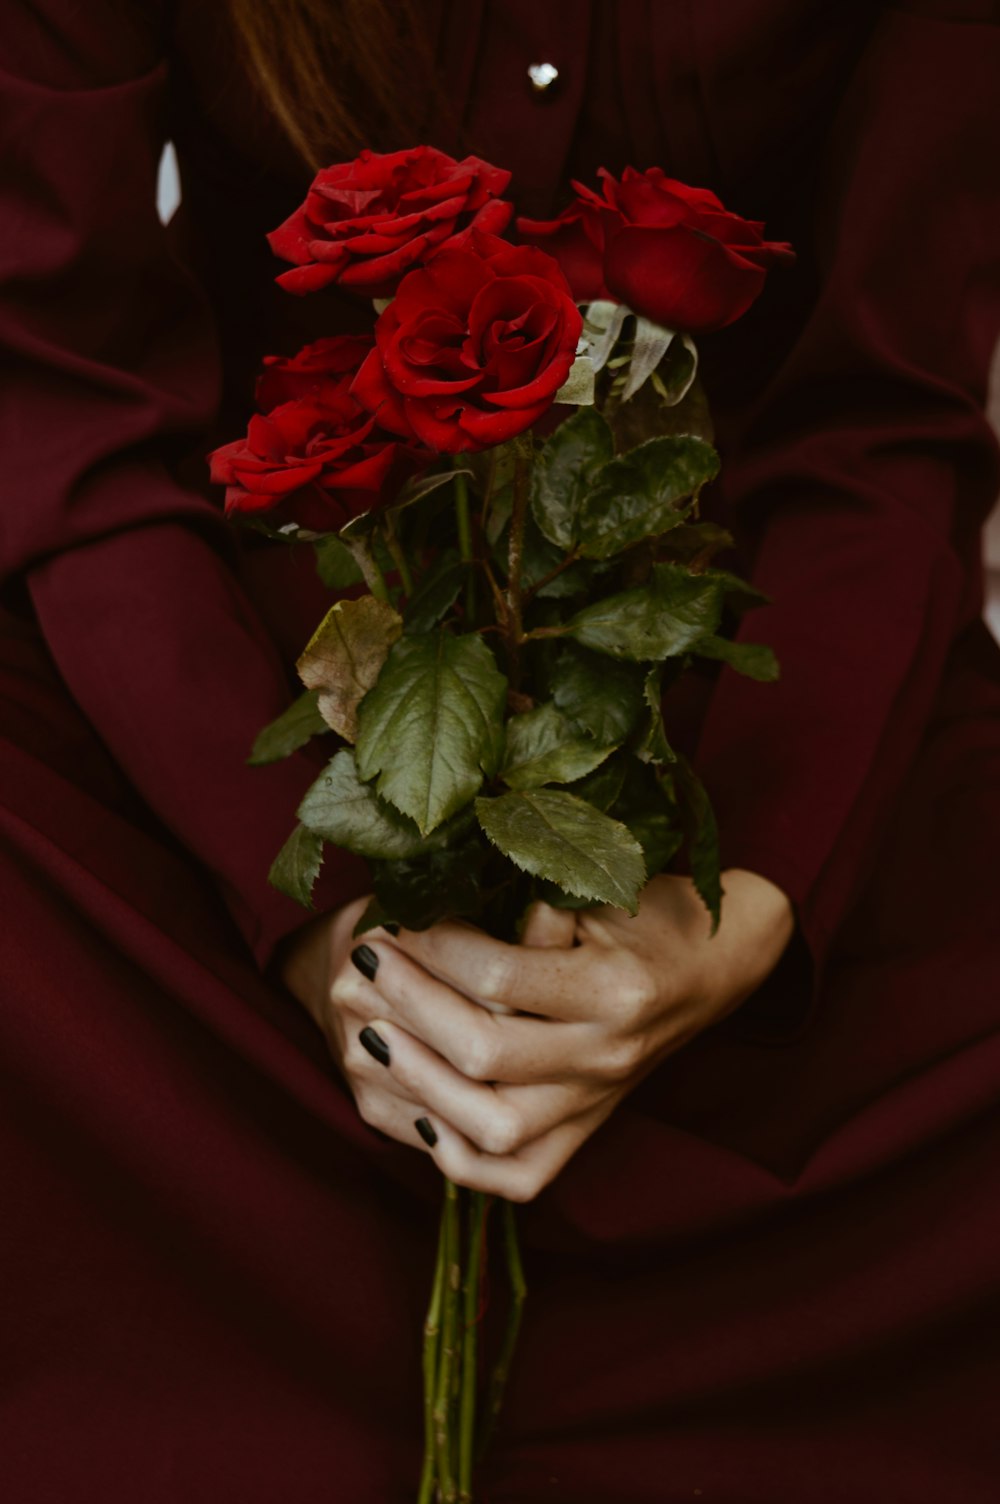 person holding red rose bouquet